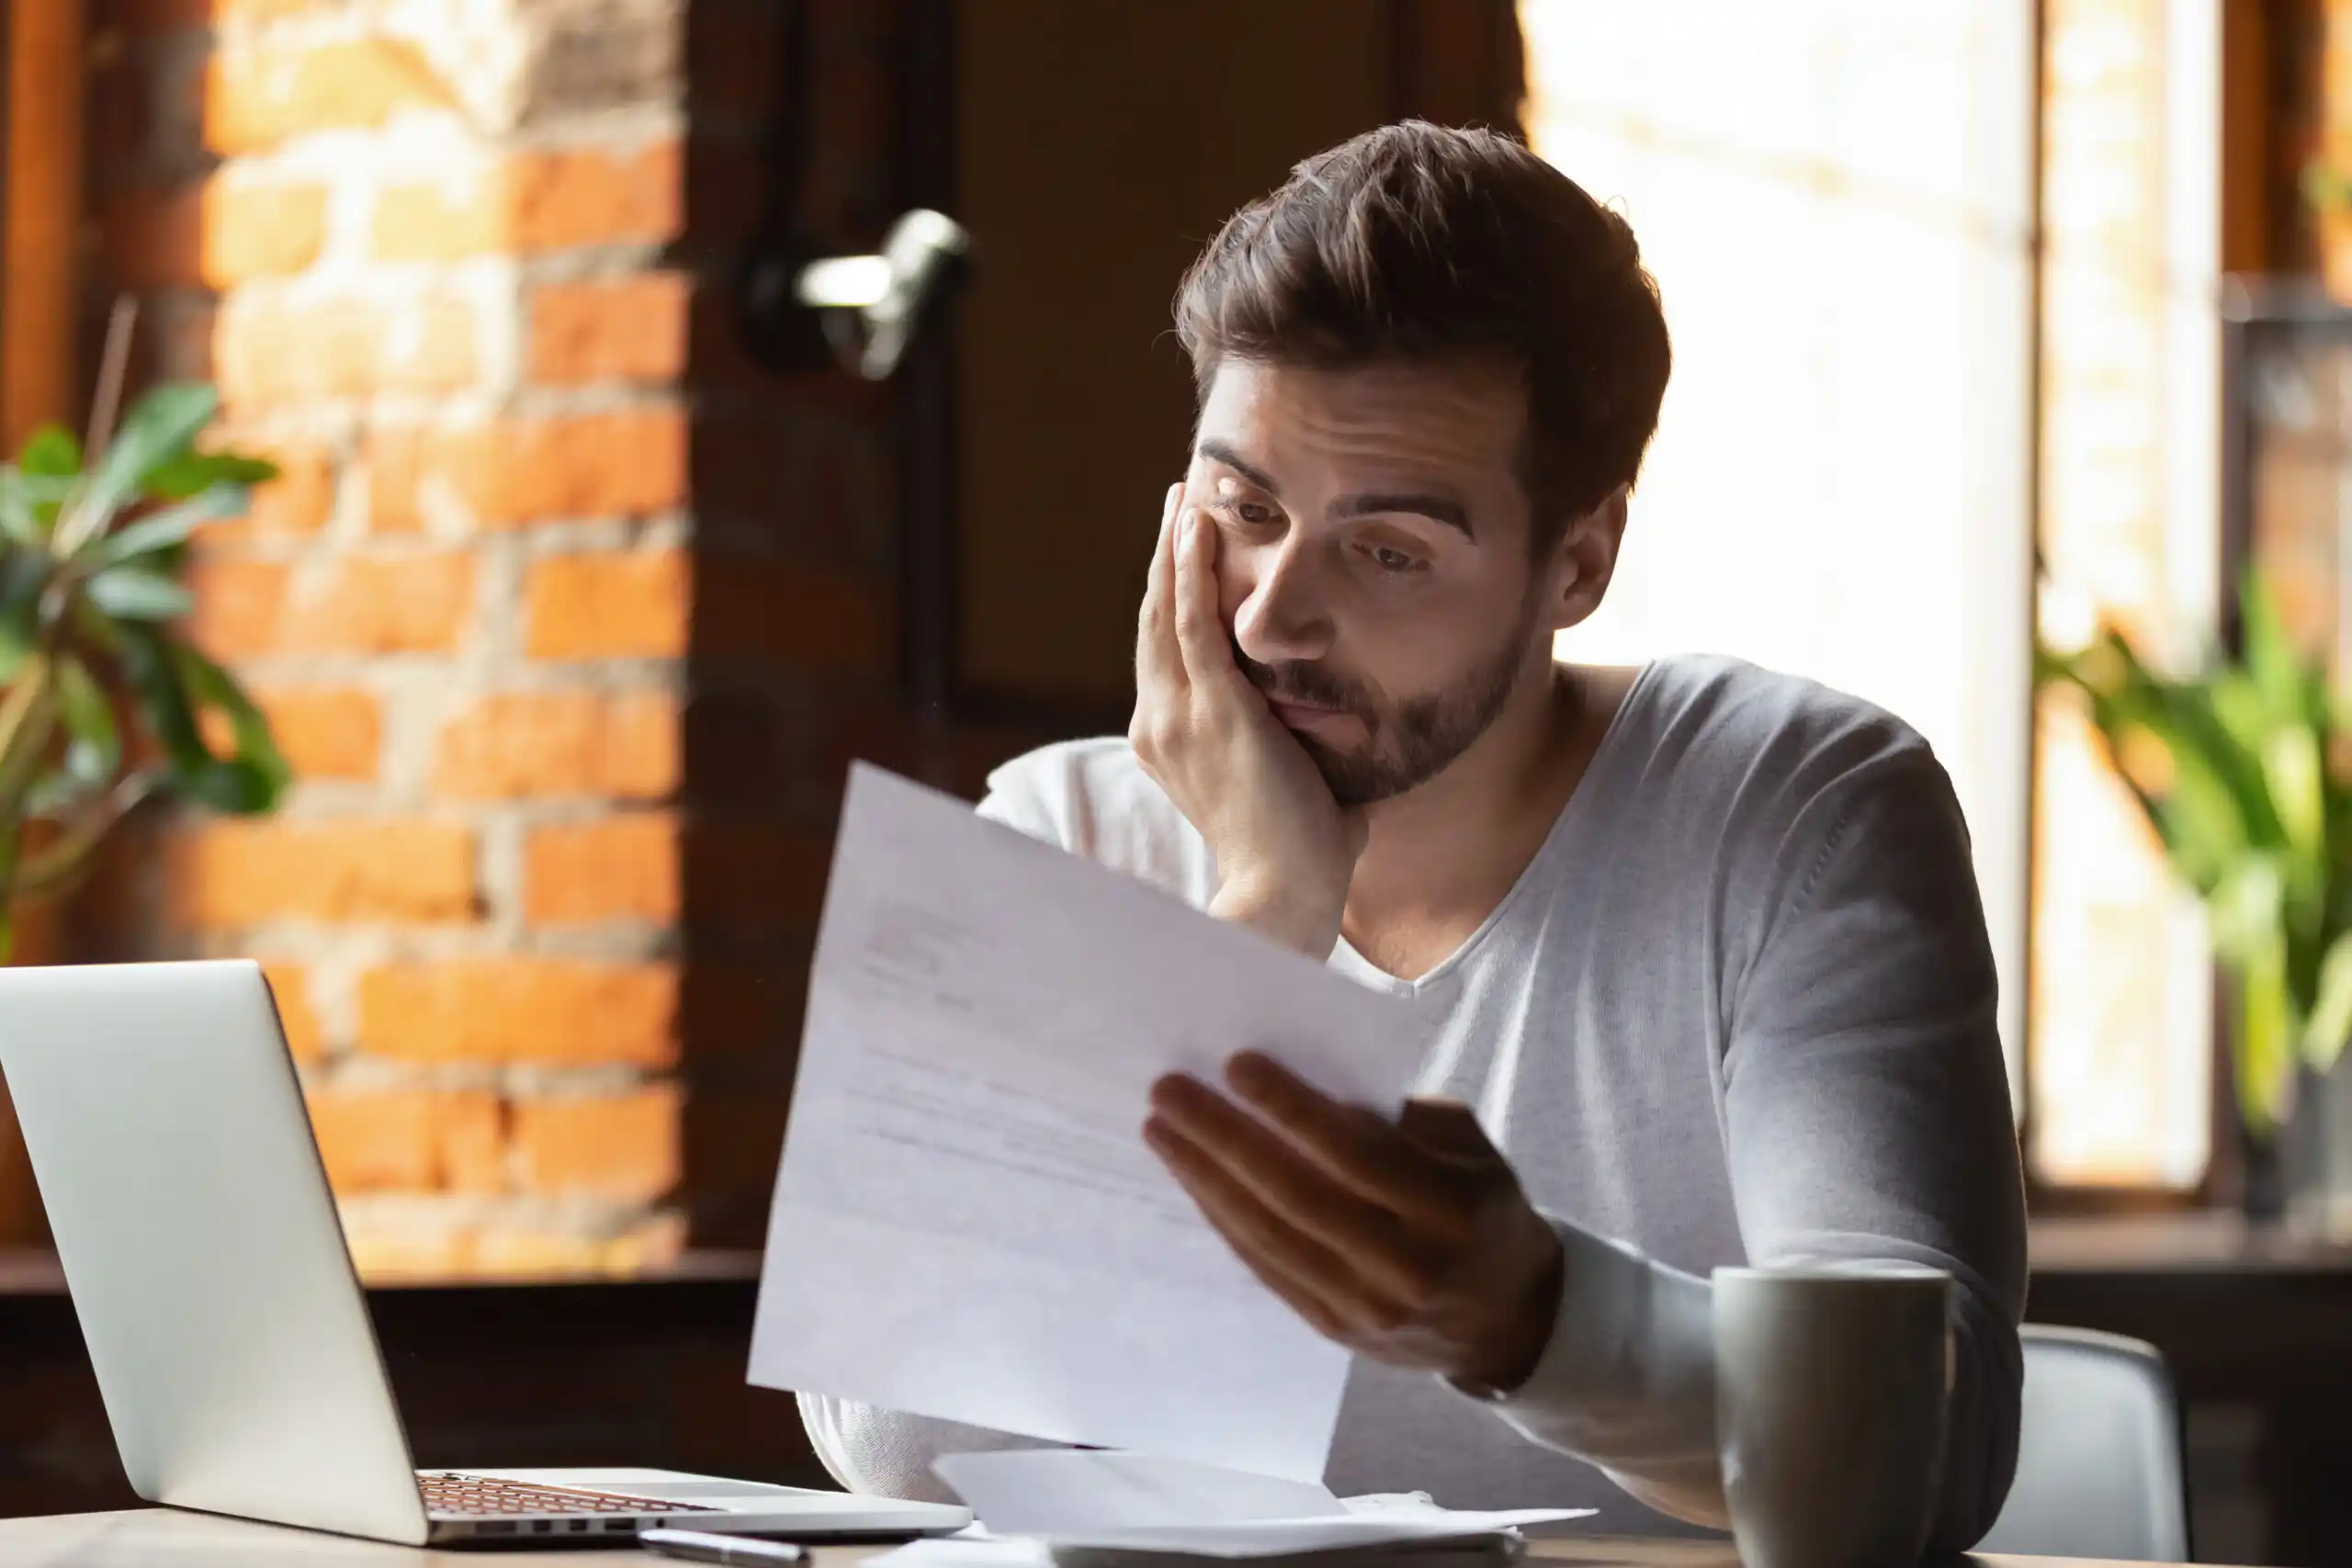 Man looks at Student Loan Notice